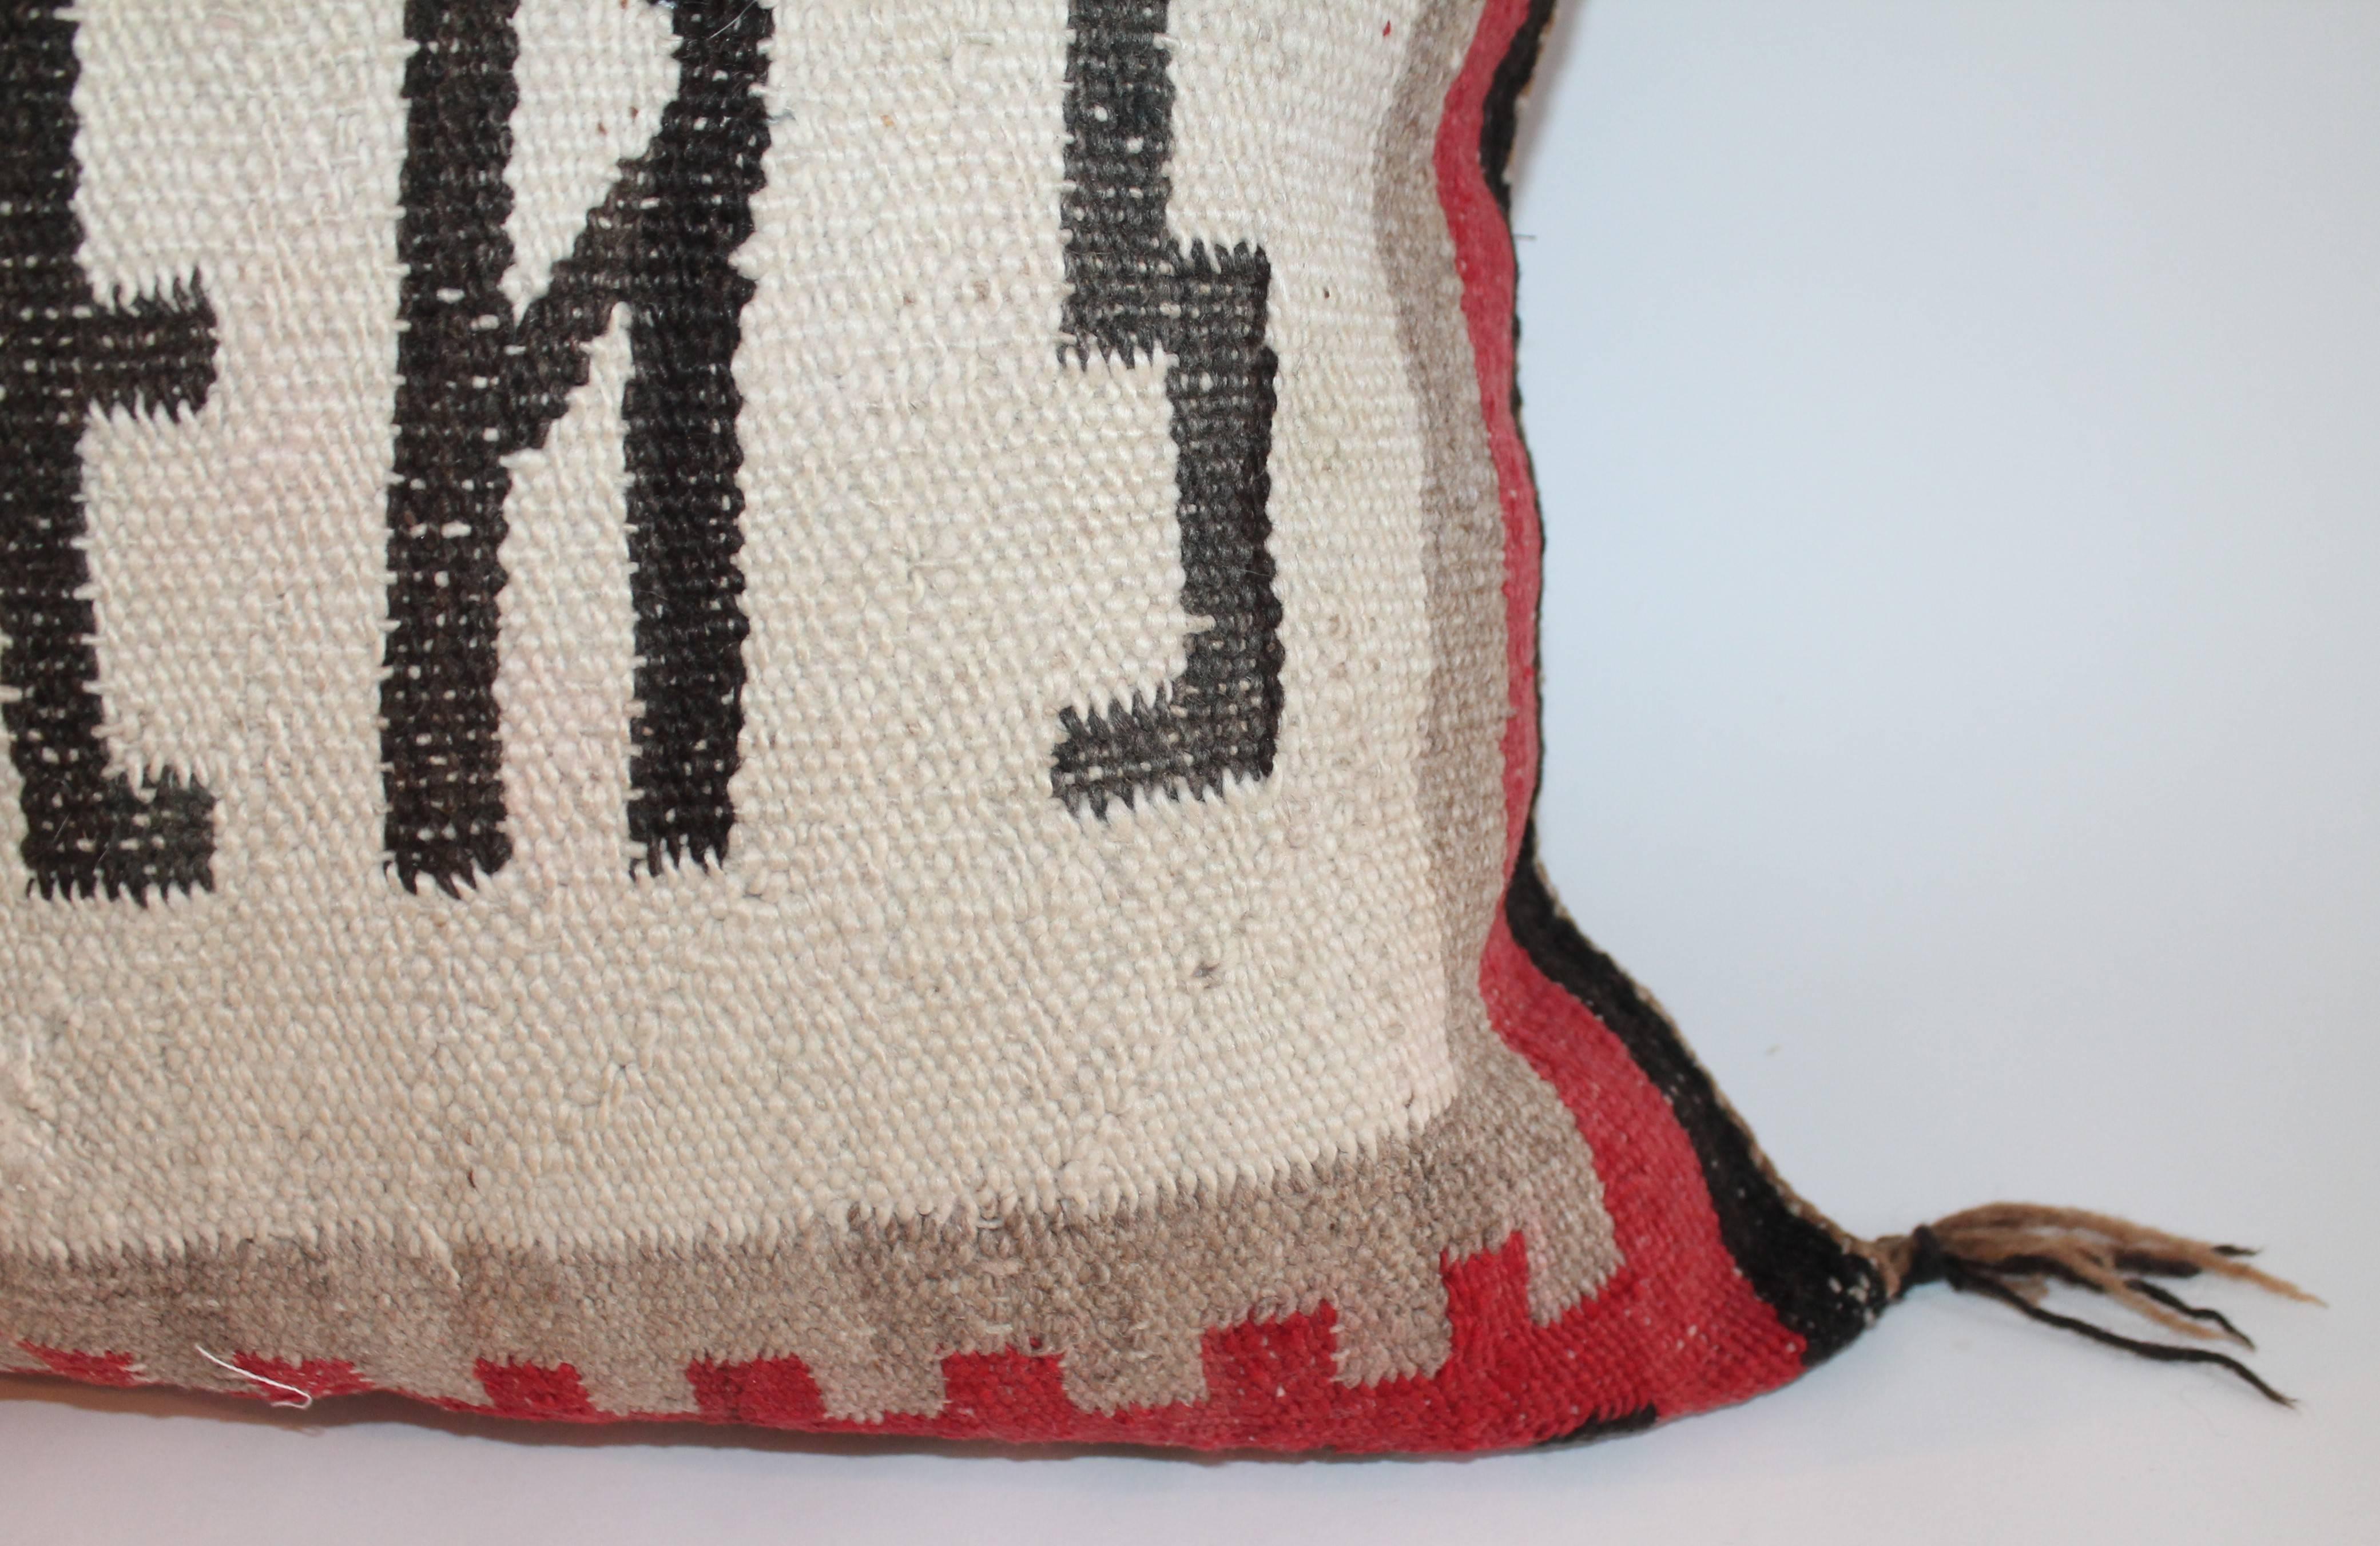 Hand-Woven Amazing Navajo Weaving Pillow with Sattler's Name